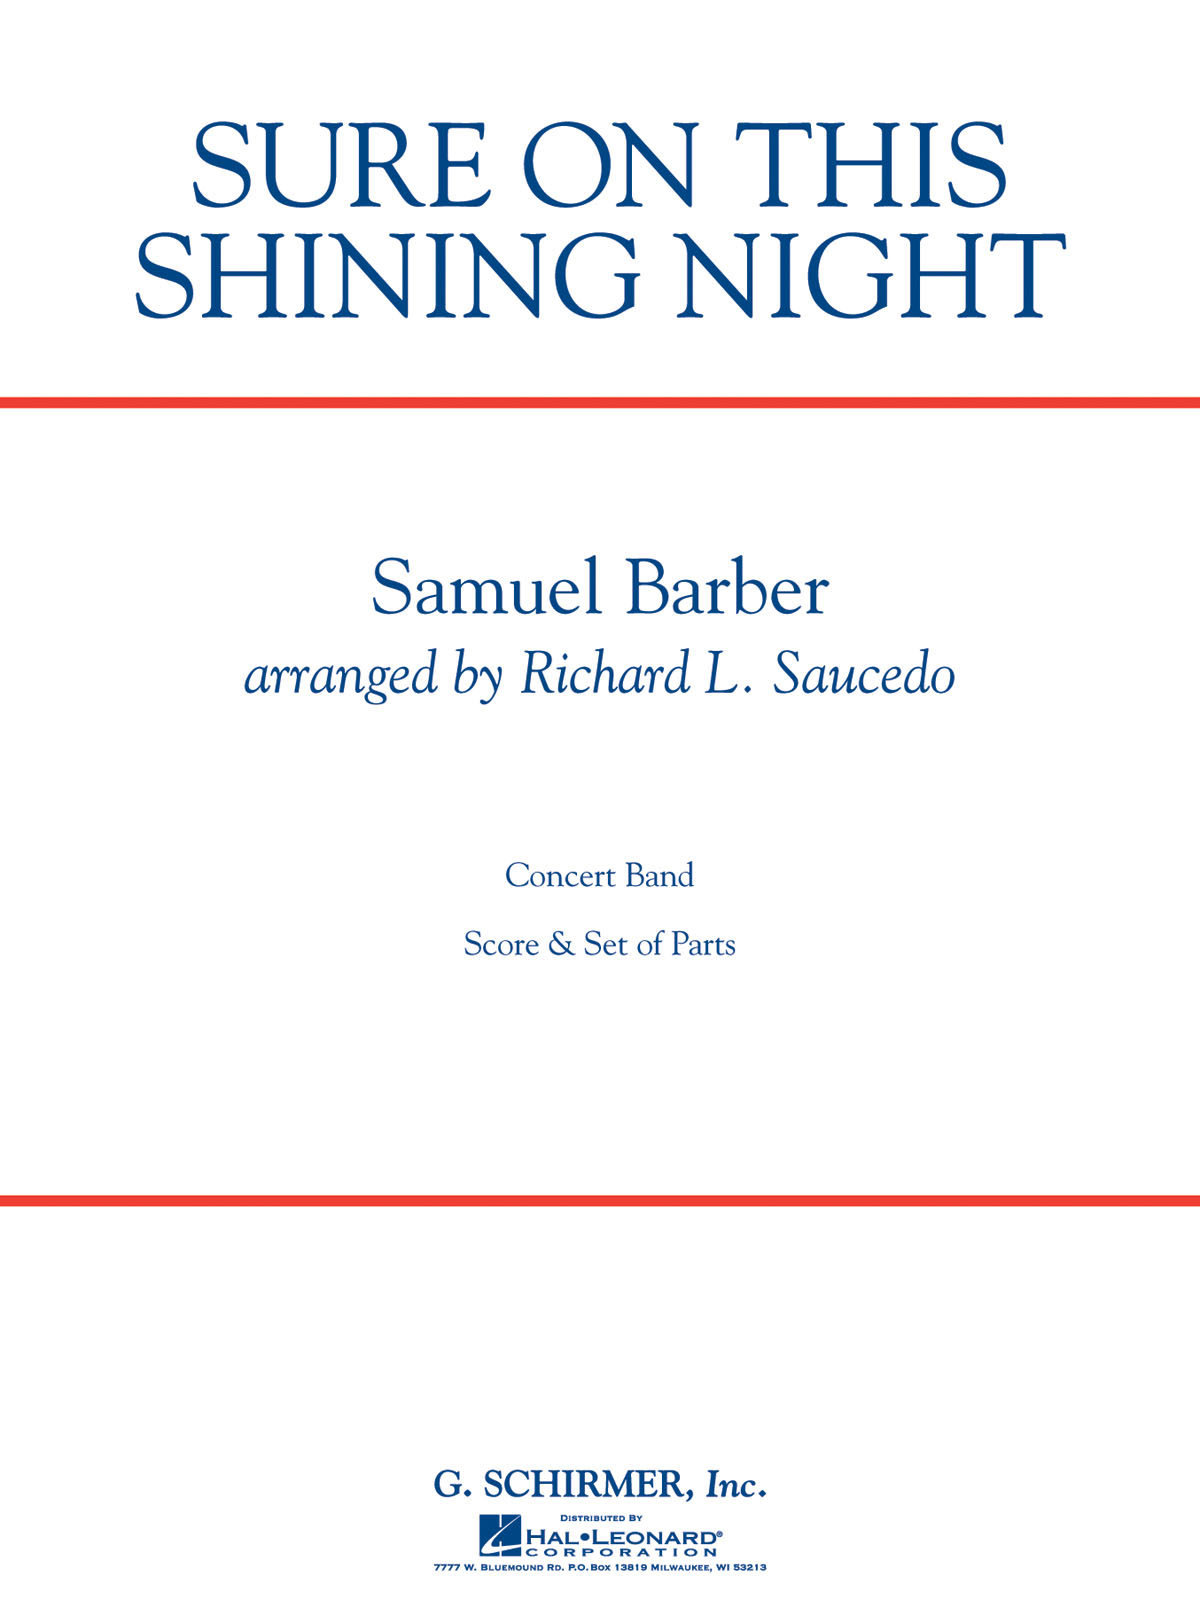 Samuel Barber: Sure on This Shining Night: Concert Band: Score